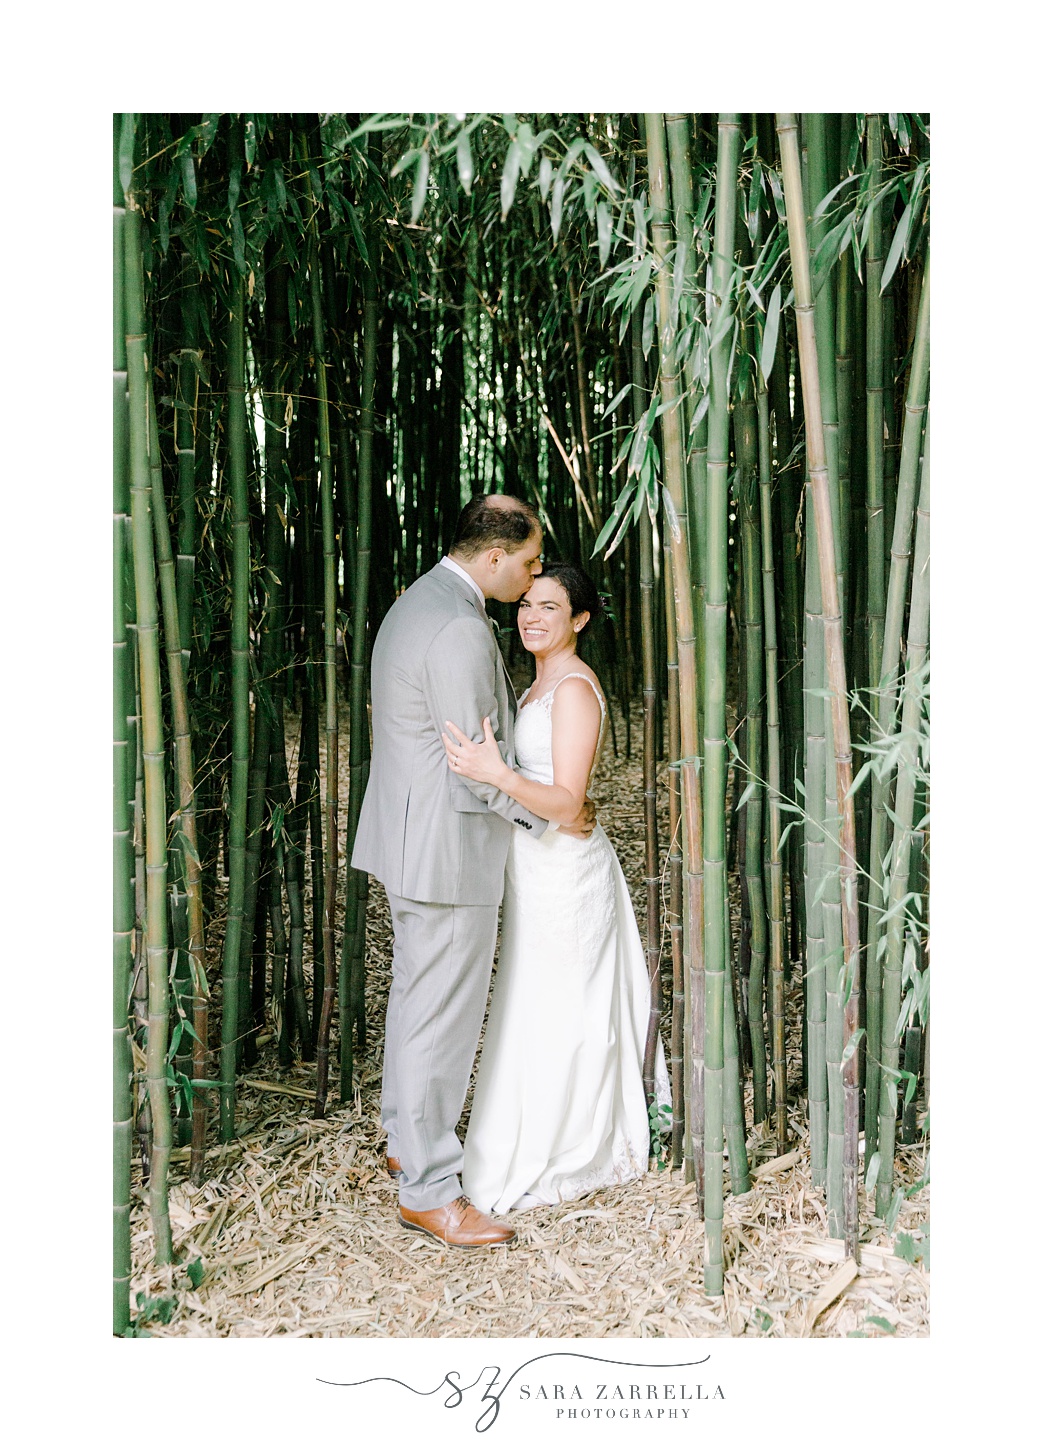 groom leans to kiss bride's forehead among bamboo at Jewish wedding ceremony at Blithewold Mansion